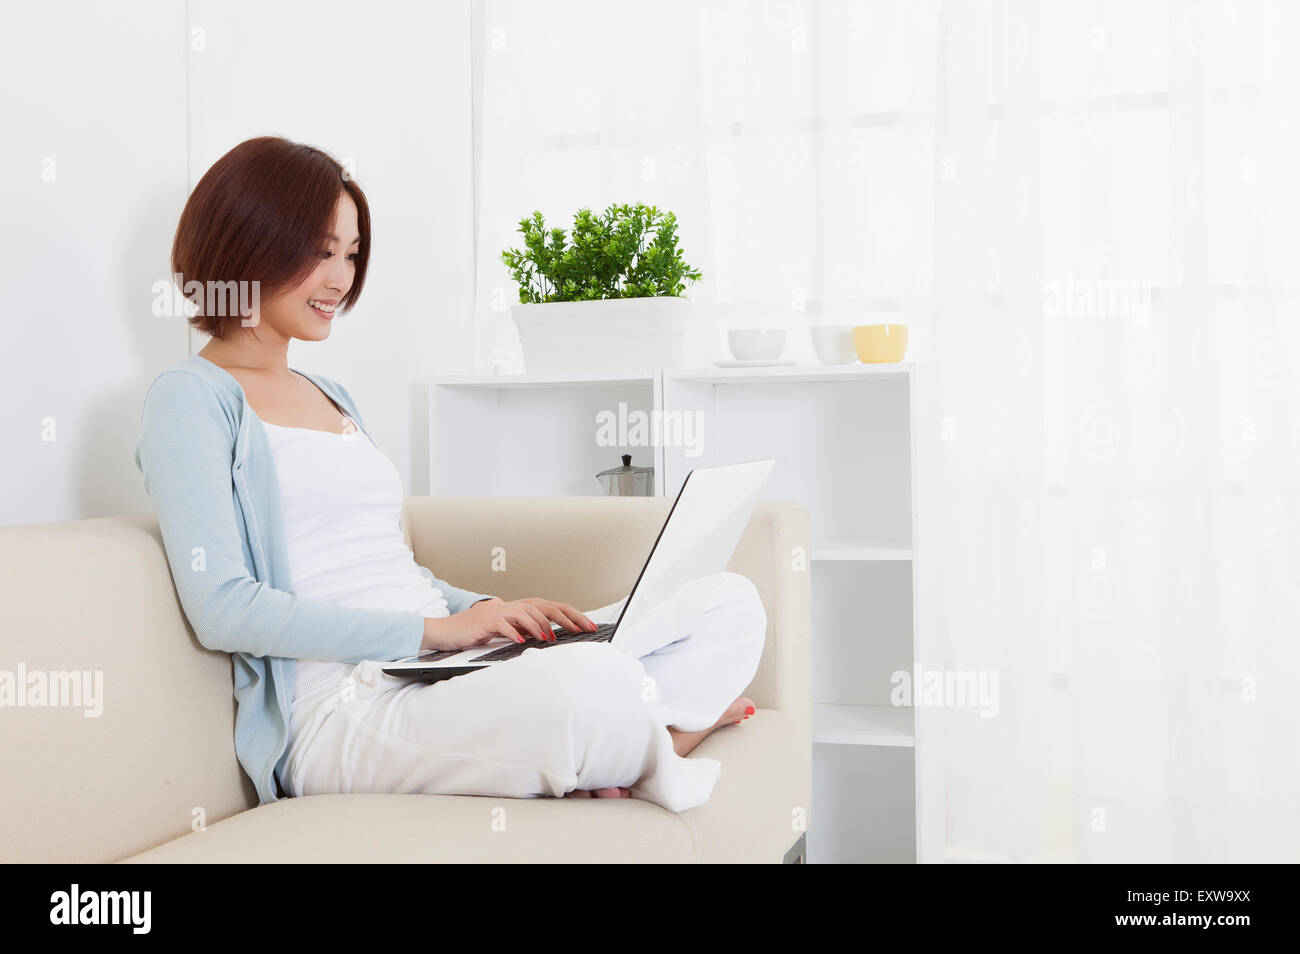 Young woman sitting on sofa and using laptop, Stock Photo